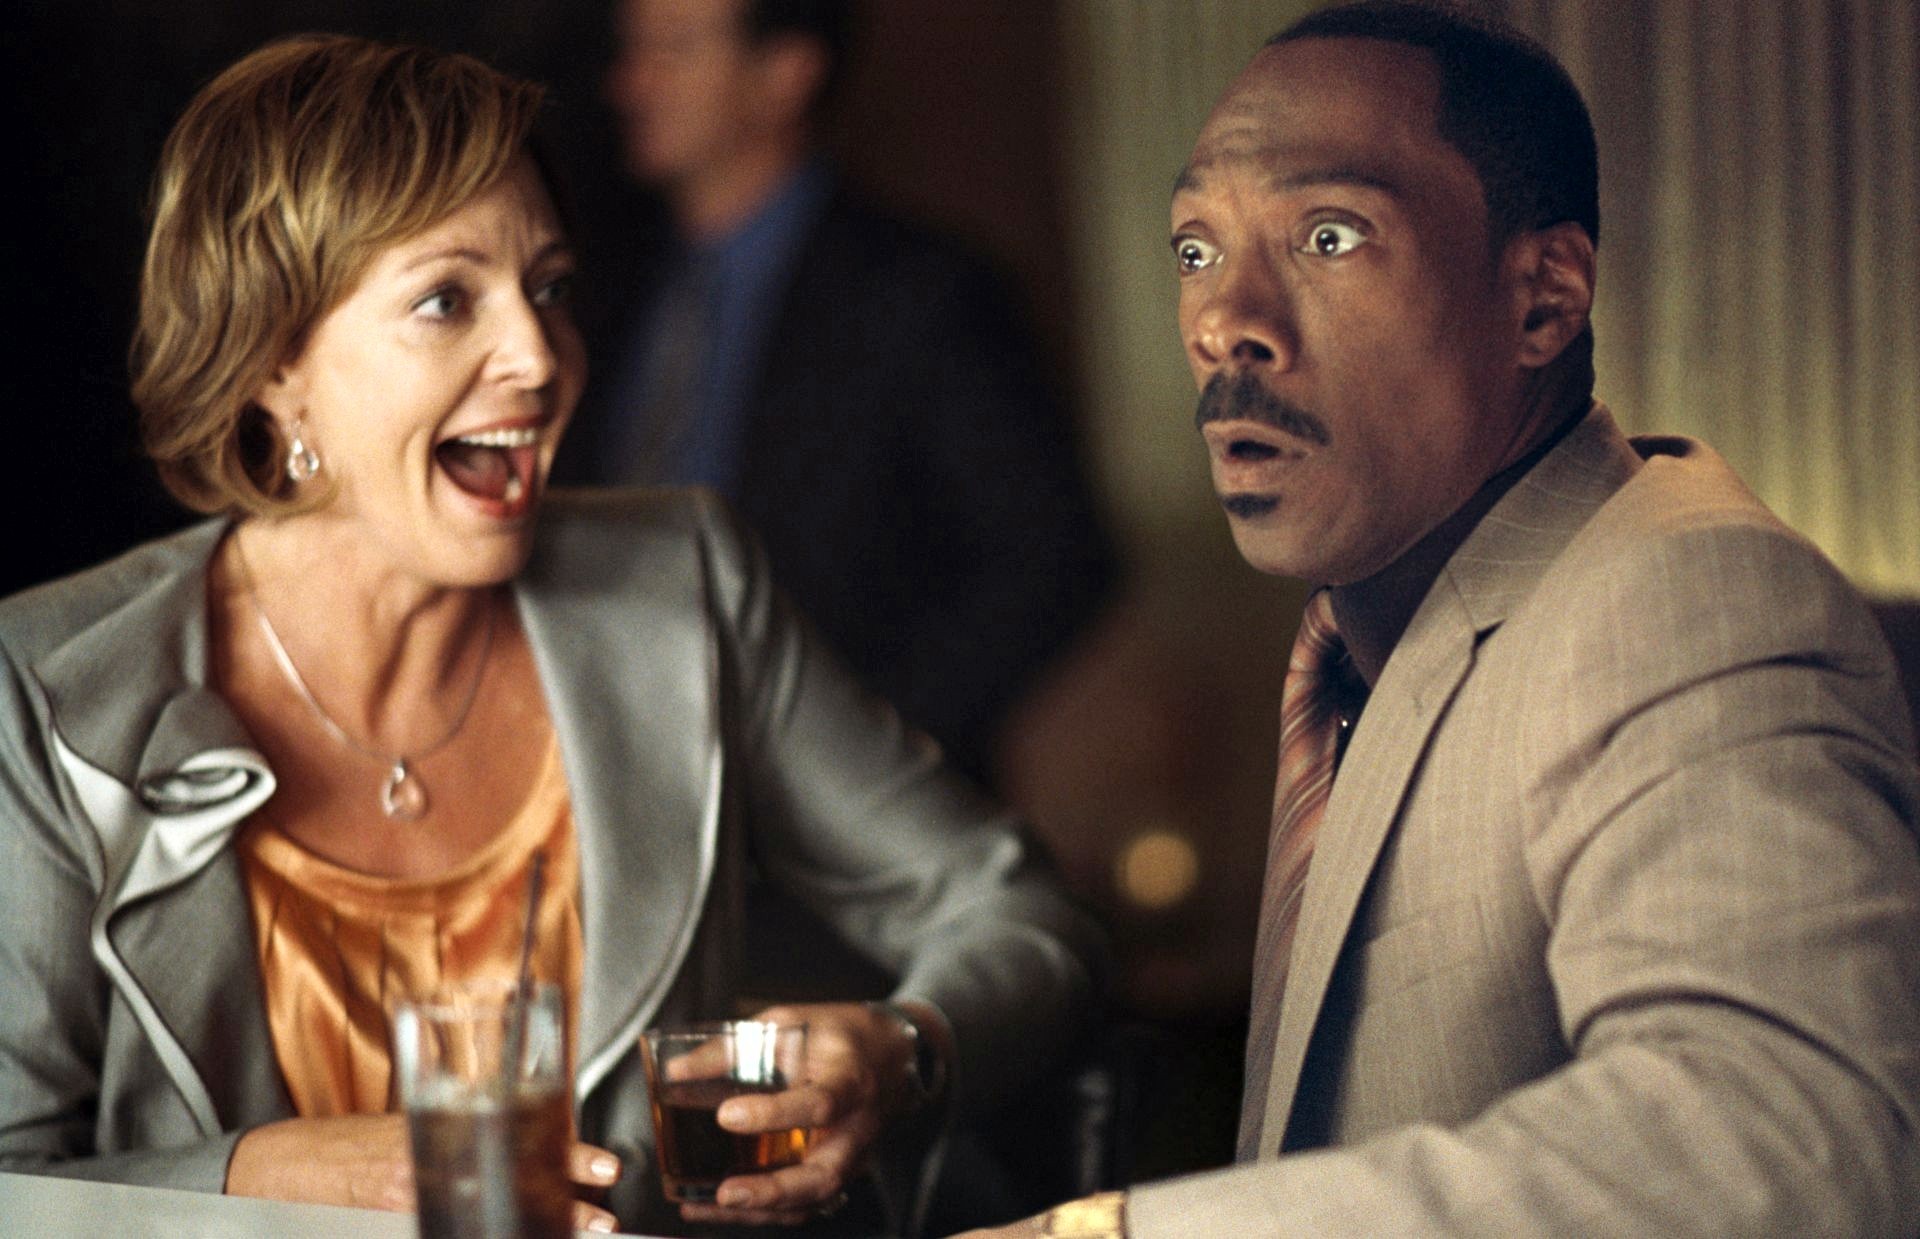 Allison Janney stars as Samantha Davis and Eddie Murphy stars as Jack McCall in DreamWorks SKG's A Thousand Words (2012). Photo credit by Bruce McBroom.